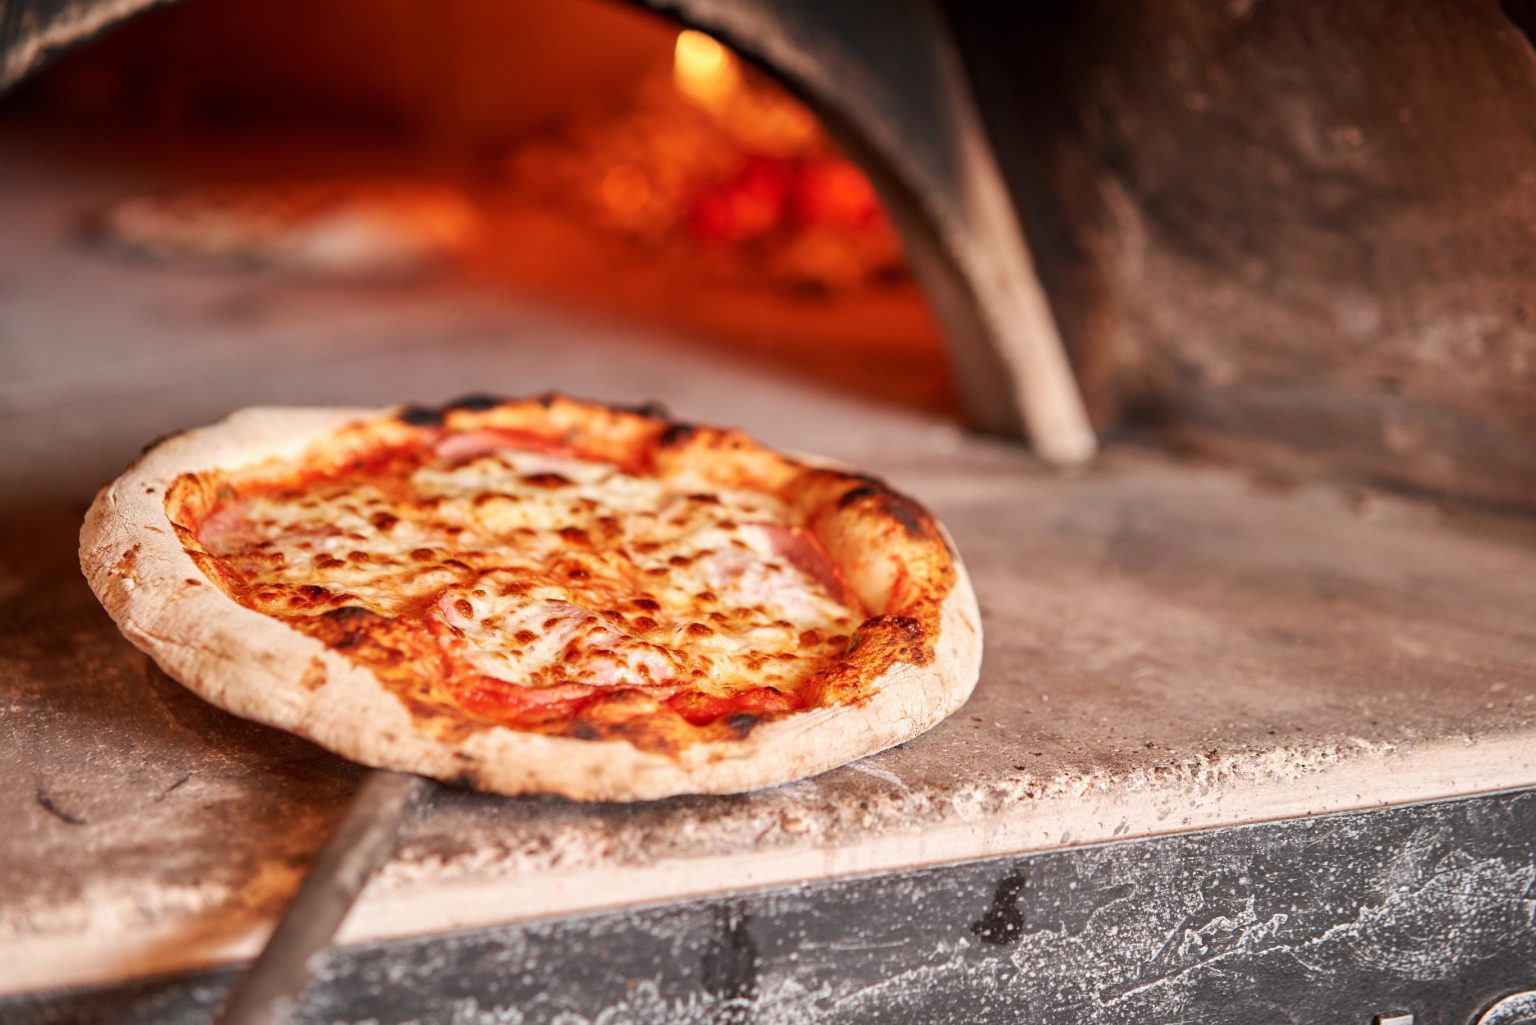 Pizza love: ten curious facts about our favorite dish | L'Italo ...